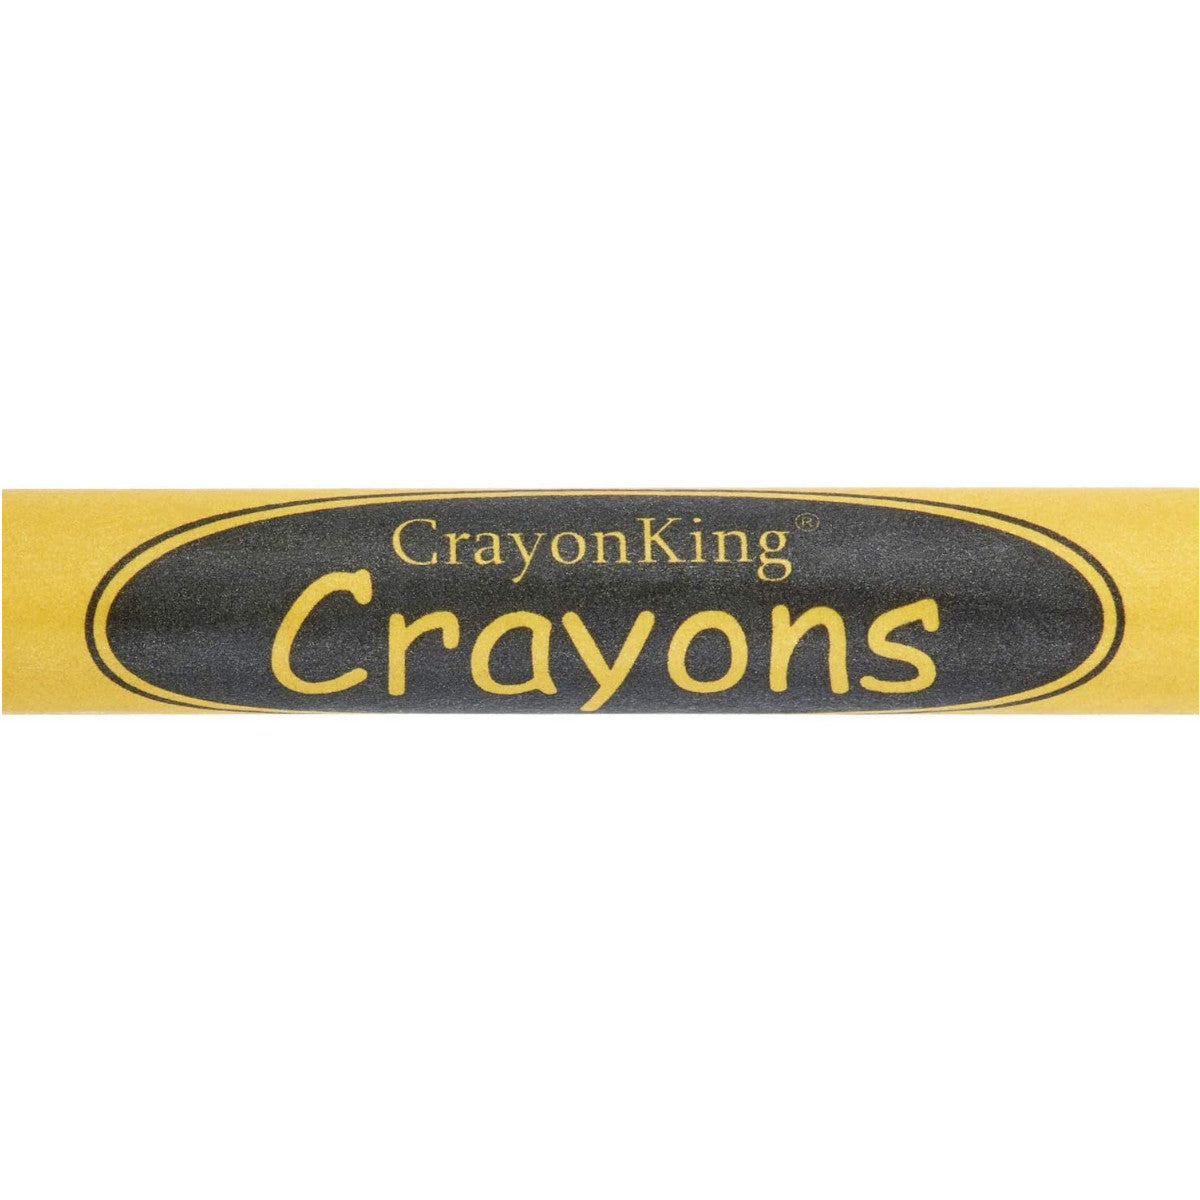 Photo showing the CrayonKing trademark and the word Crayons